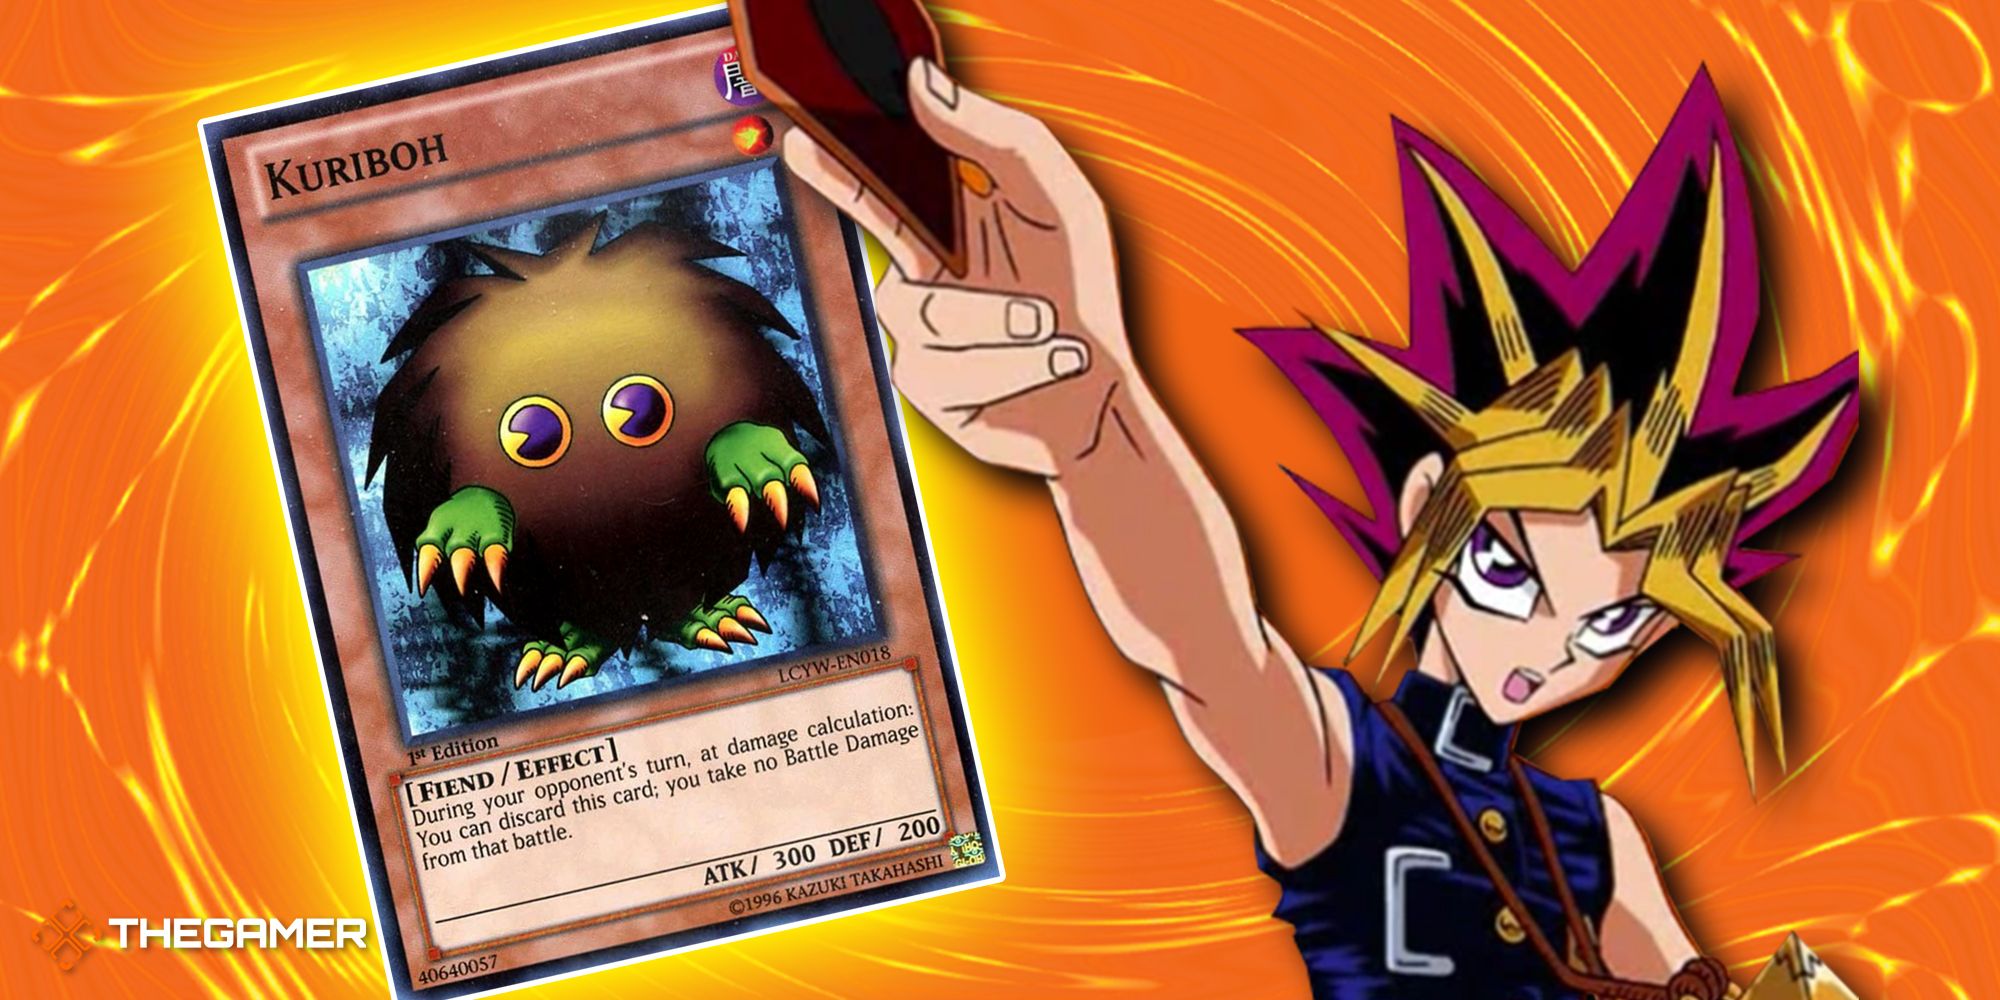 Image art and card from Yu-Gi-Oh!